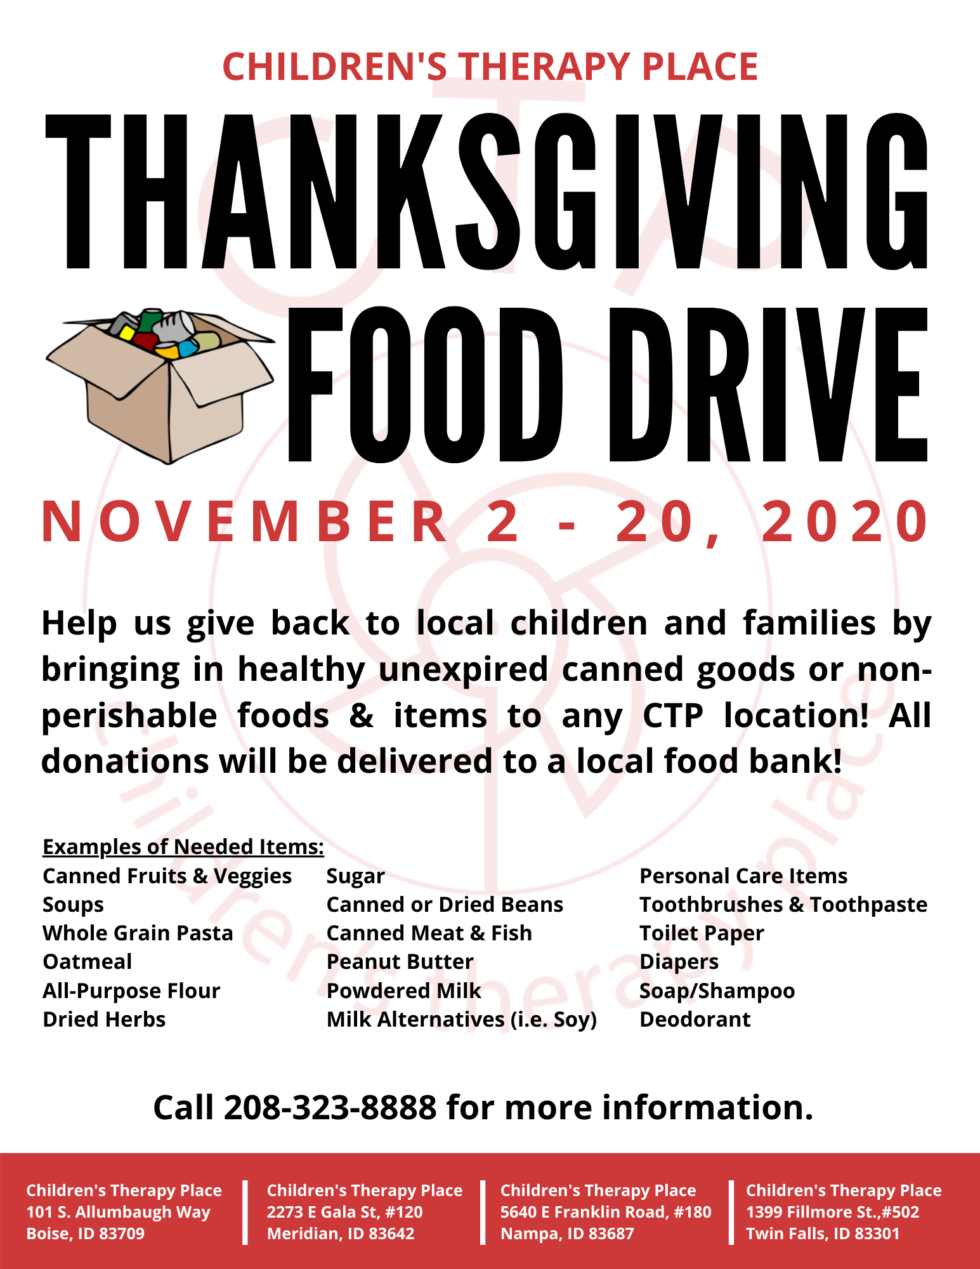 Thanksgiving Food Drive 2020 - Children's Therapy Place